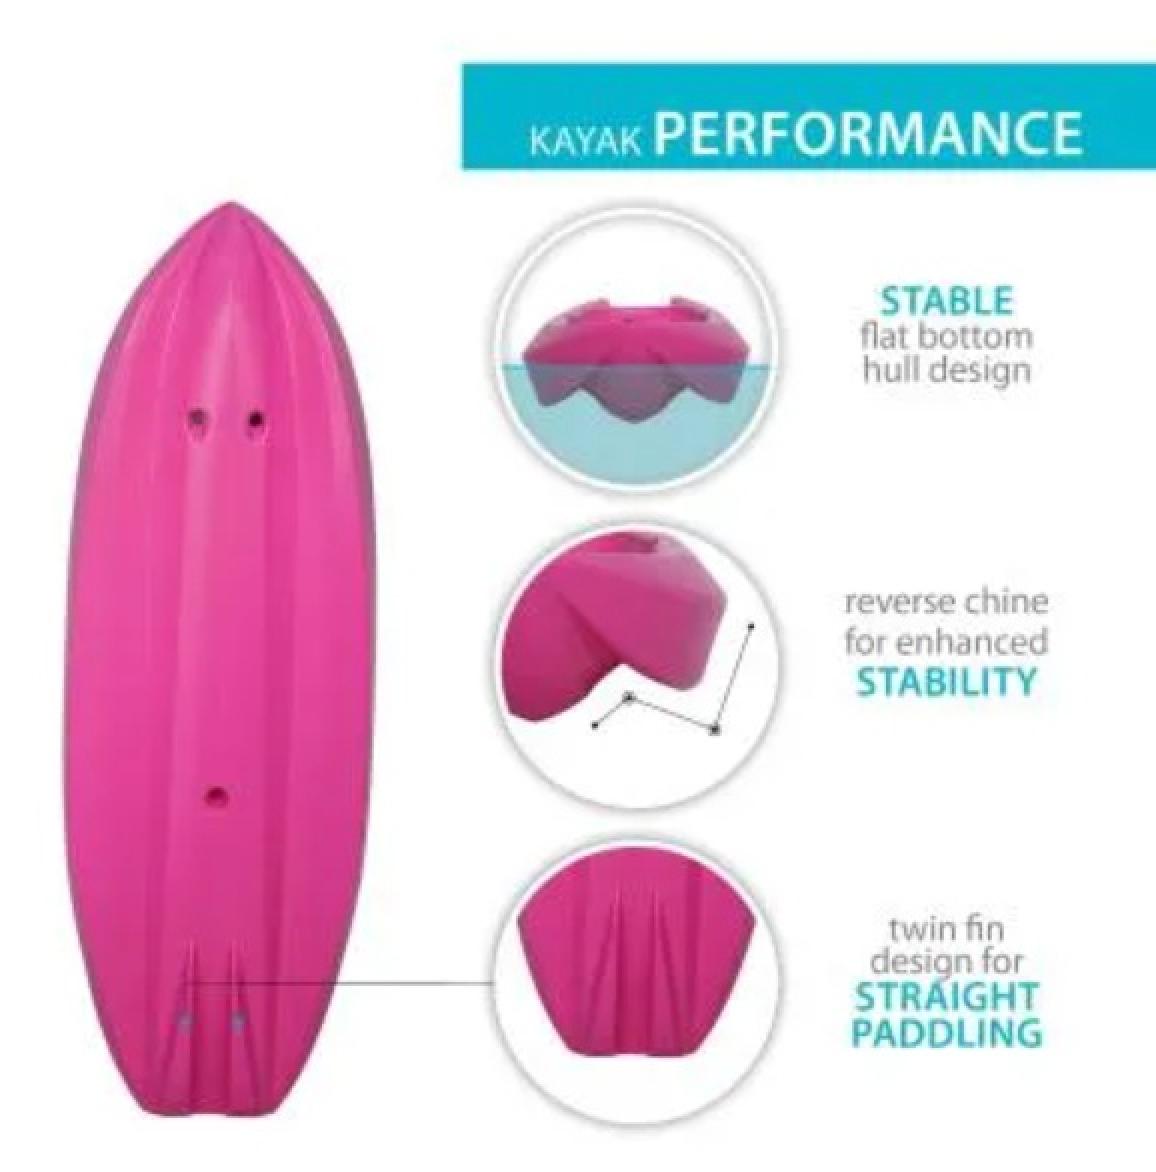 Lifetime Wave 6 Ft. Youth Kayak (Paddle Included)